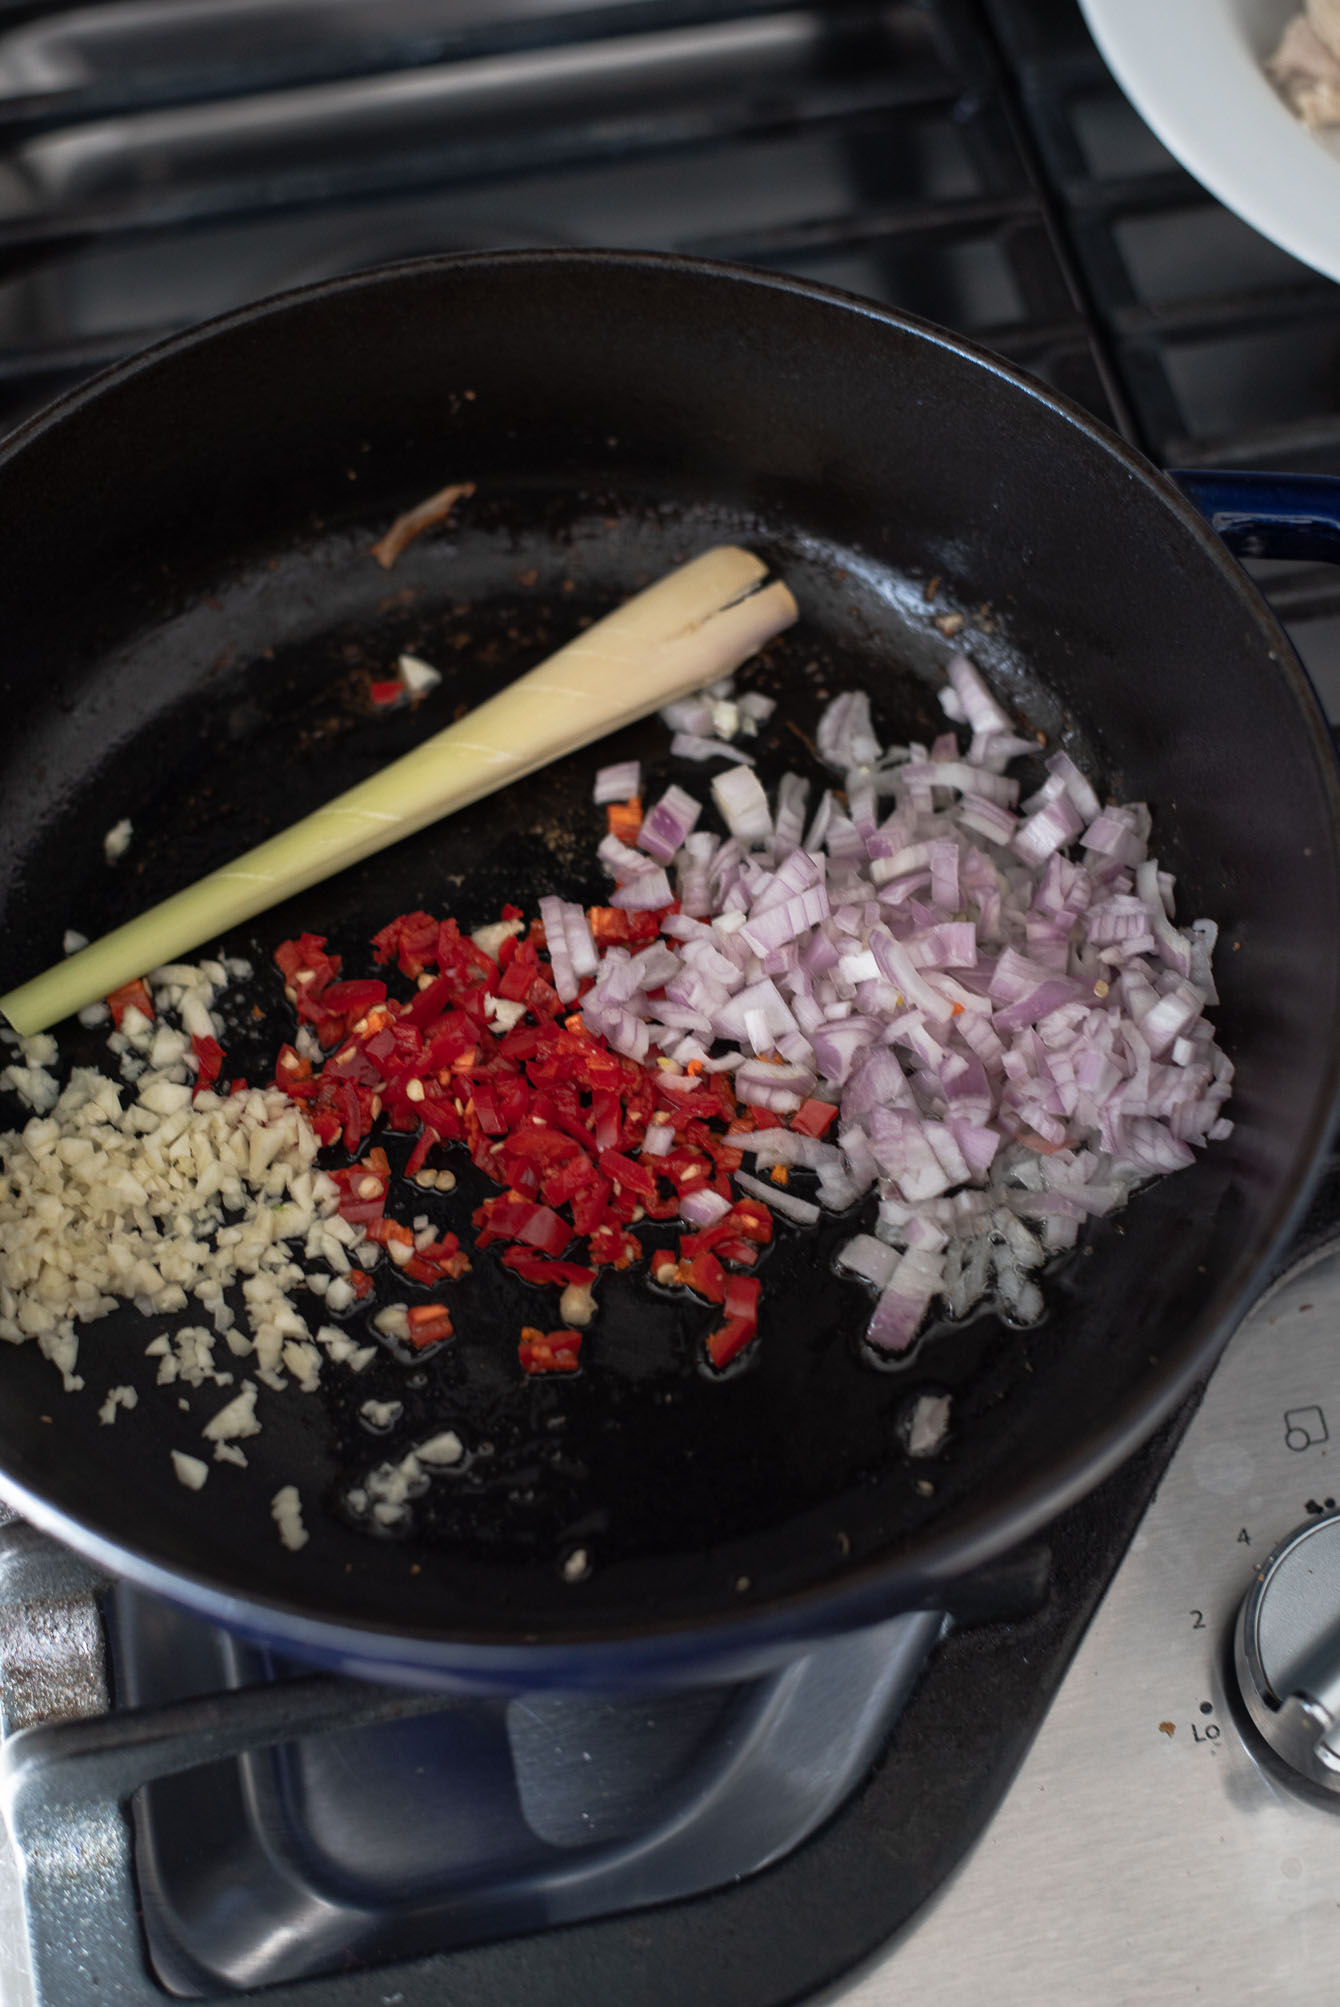 Savory ingredients added to make Thai red curry chicken.